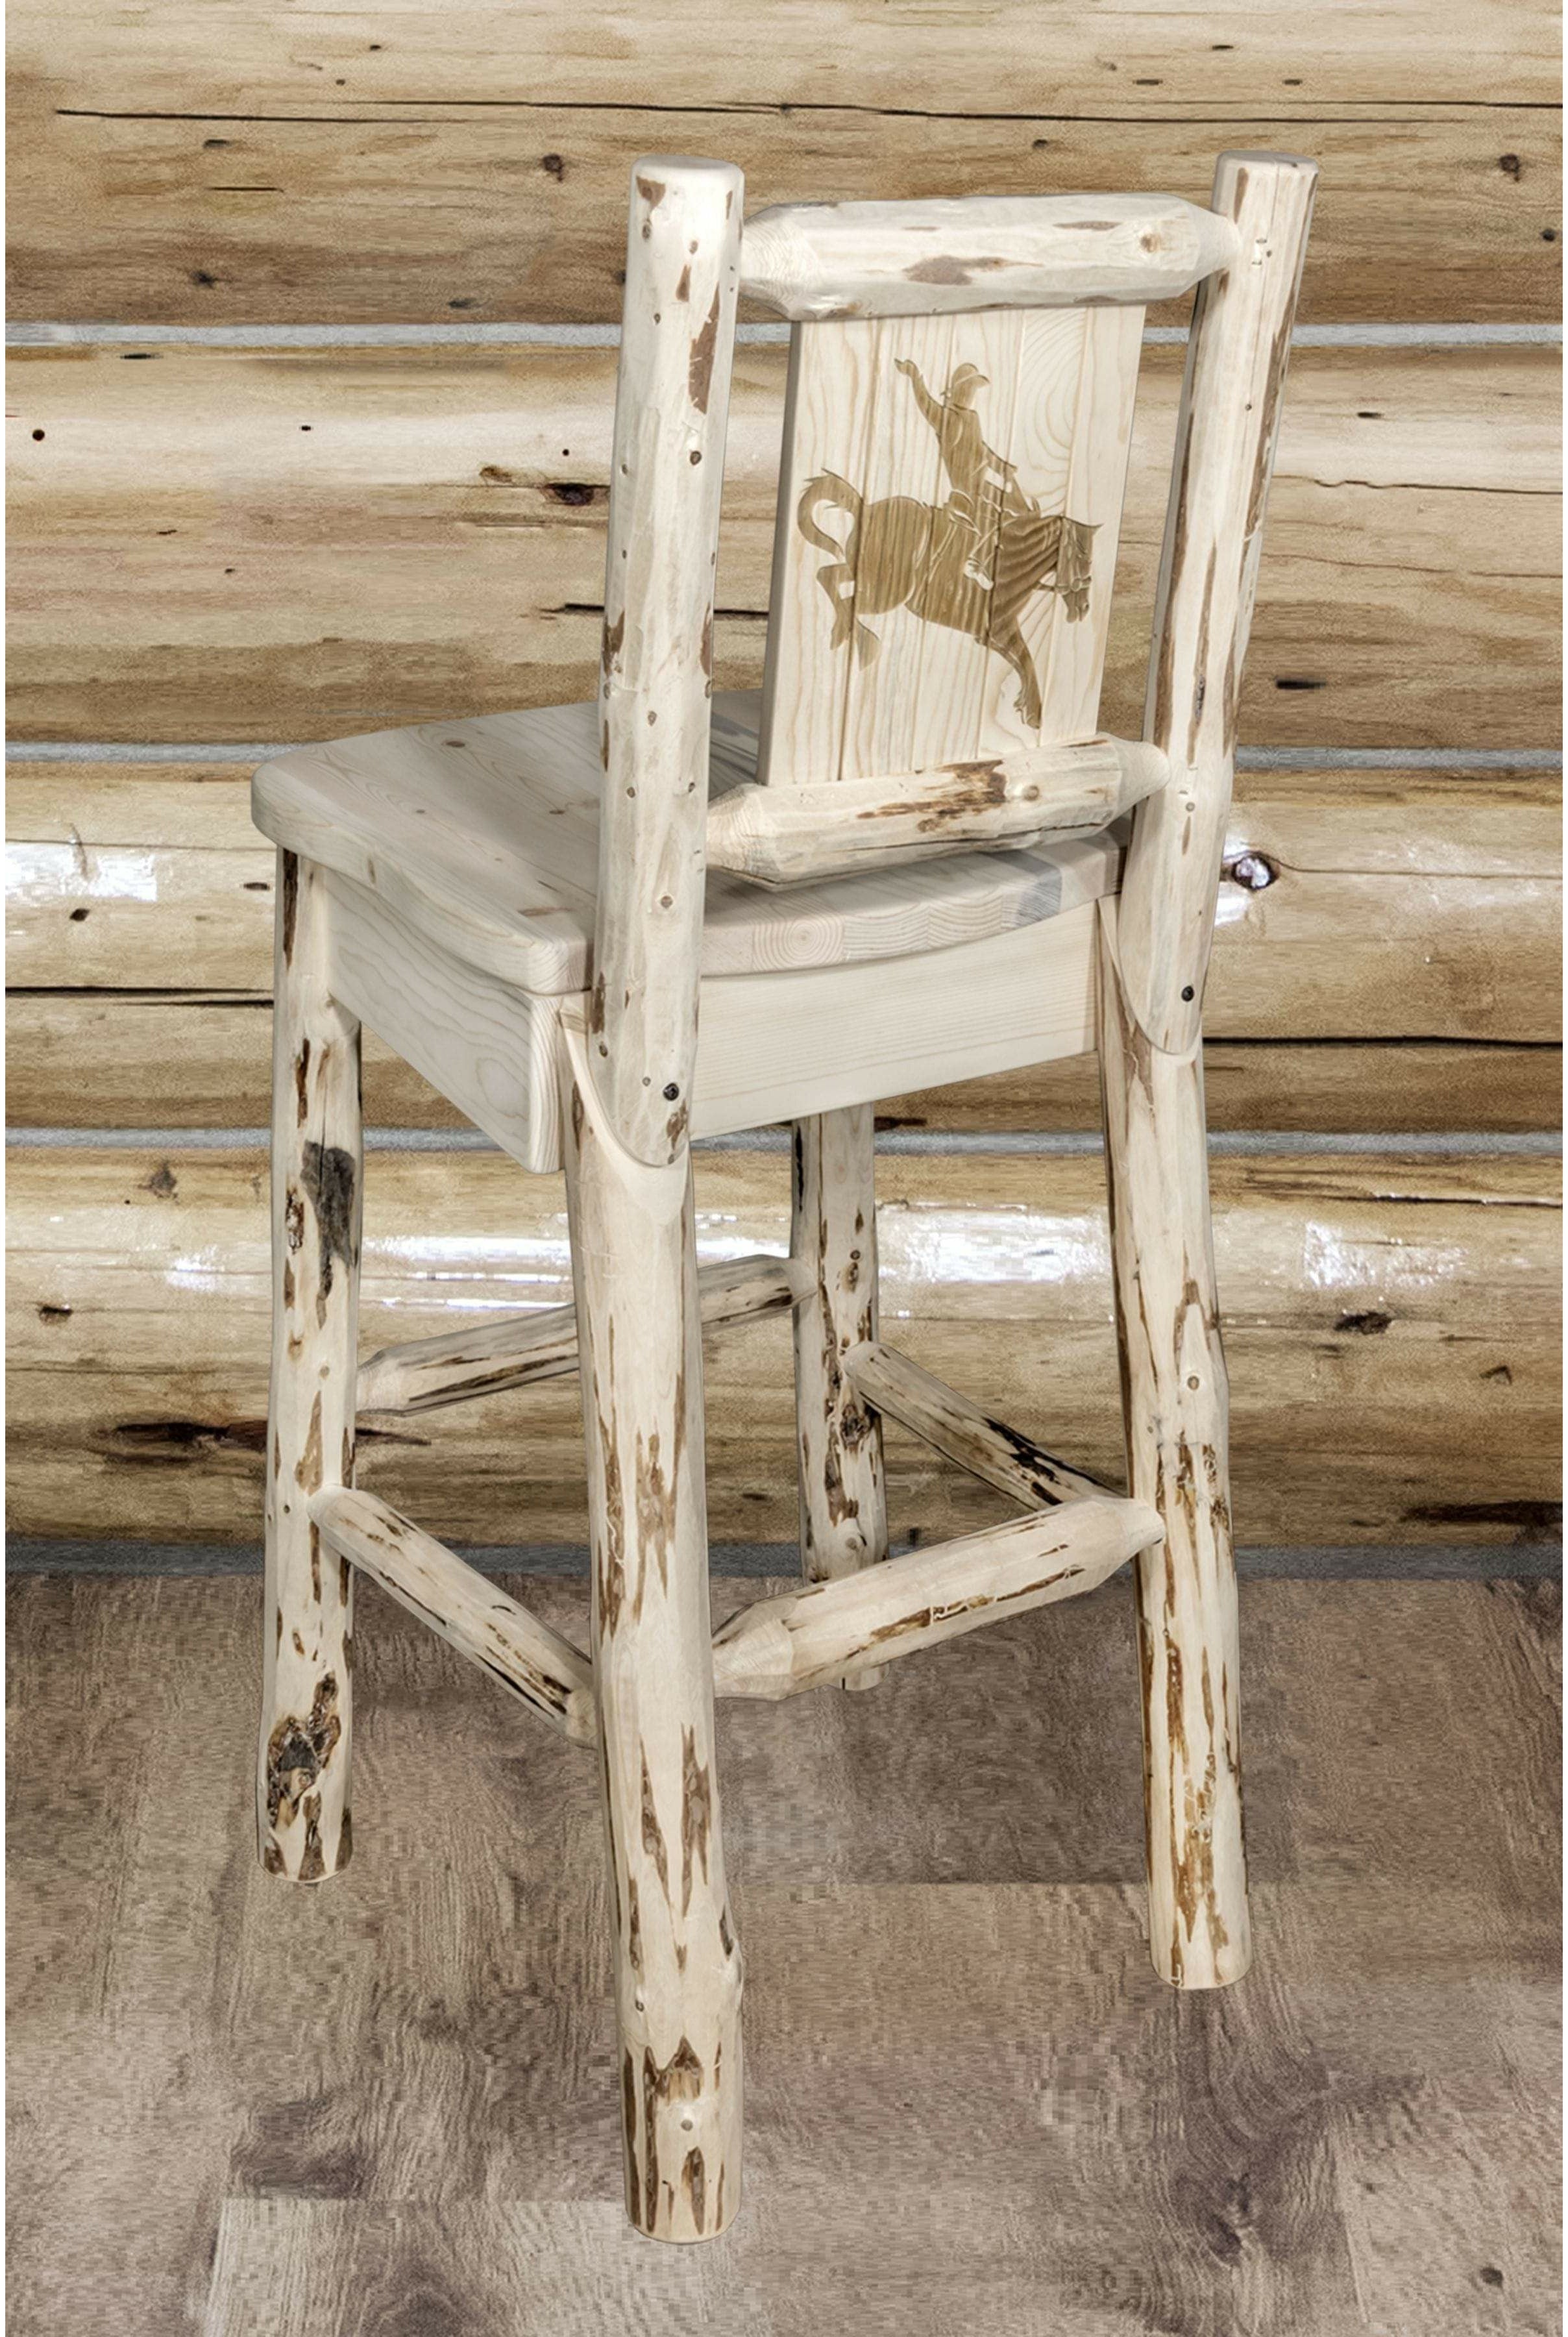 Montana Woodworks Montana Collection Barstool with Laser Engraved Moose Design - Ready to Finish-Rustic Furniture Marketplace